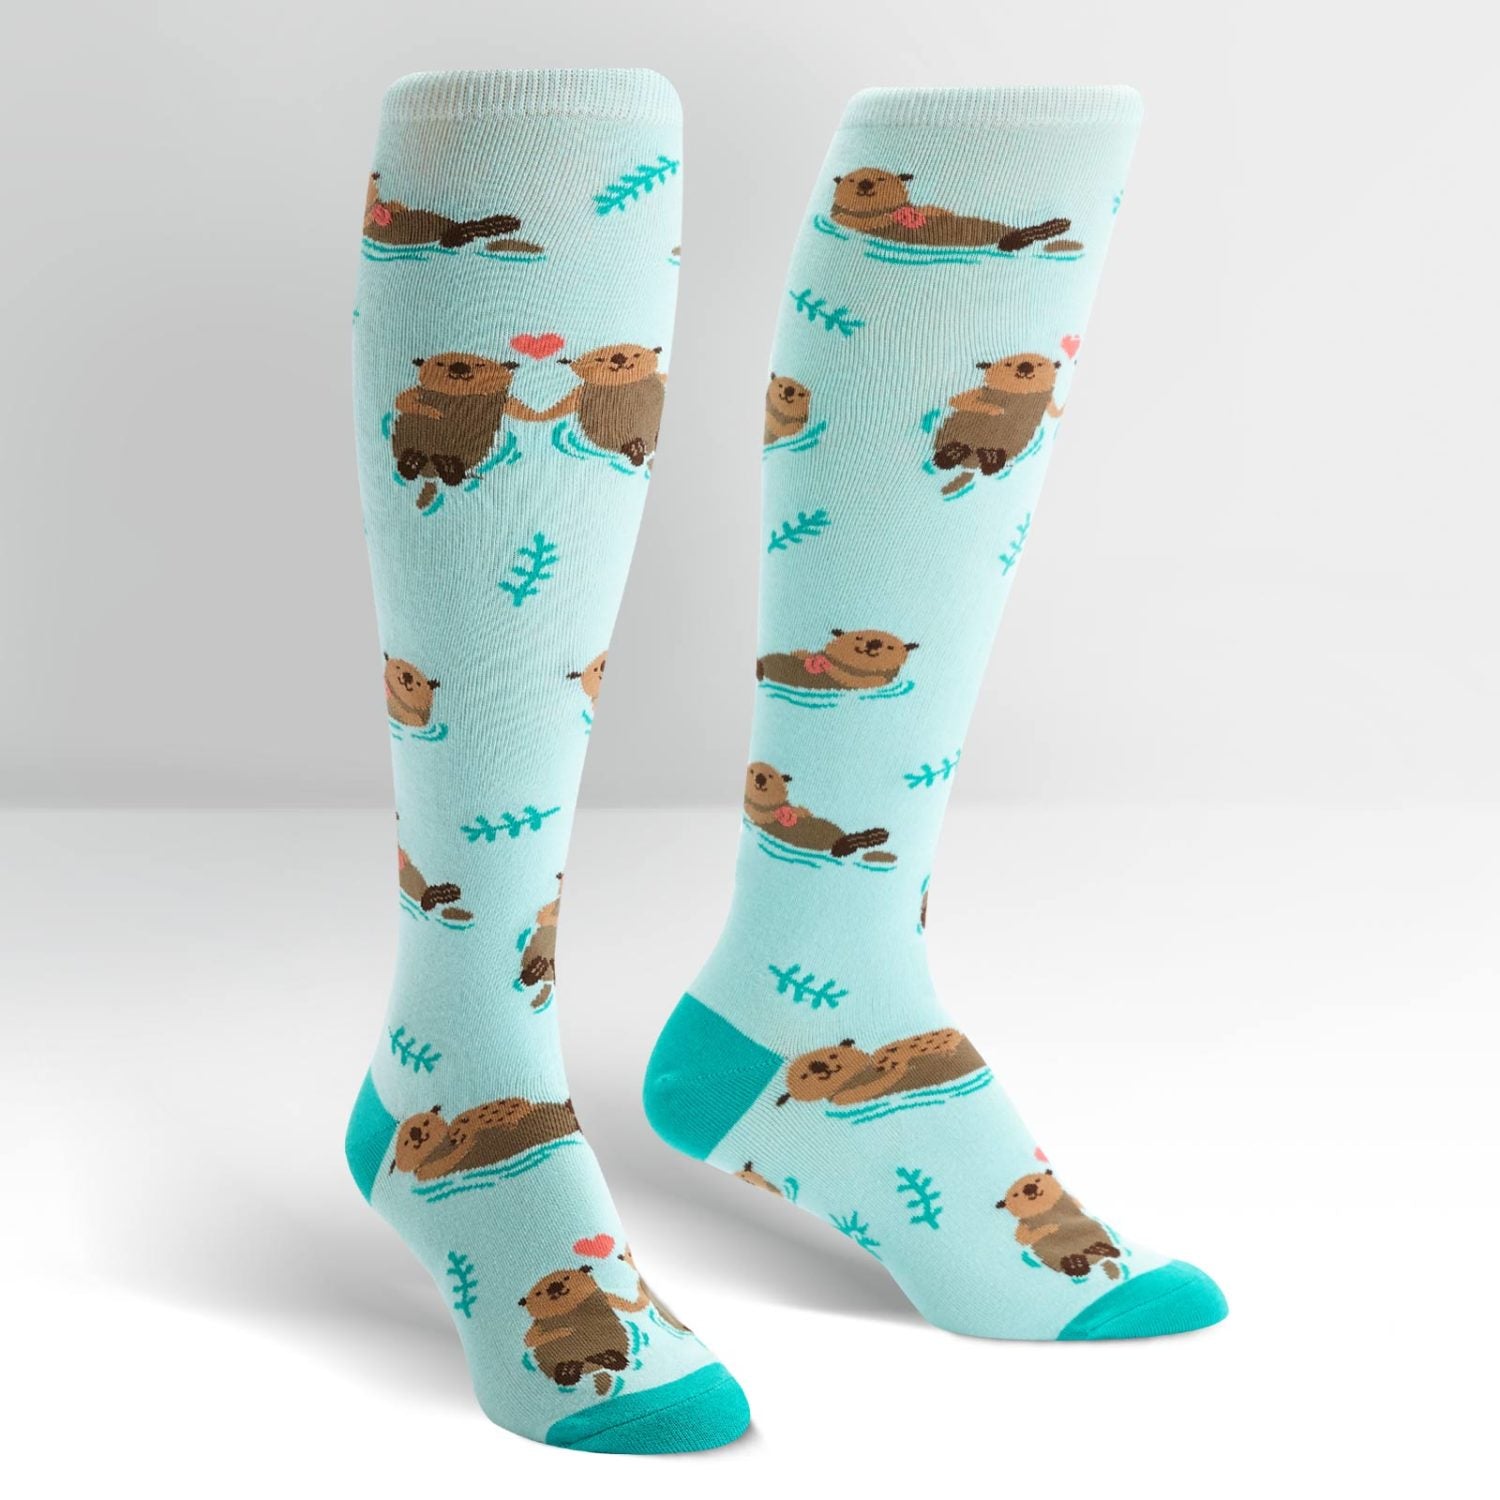 blue novelty womens knee highs with otters holding hands